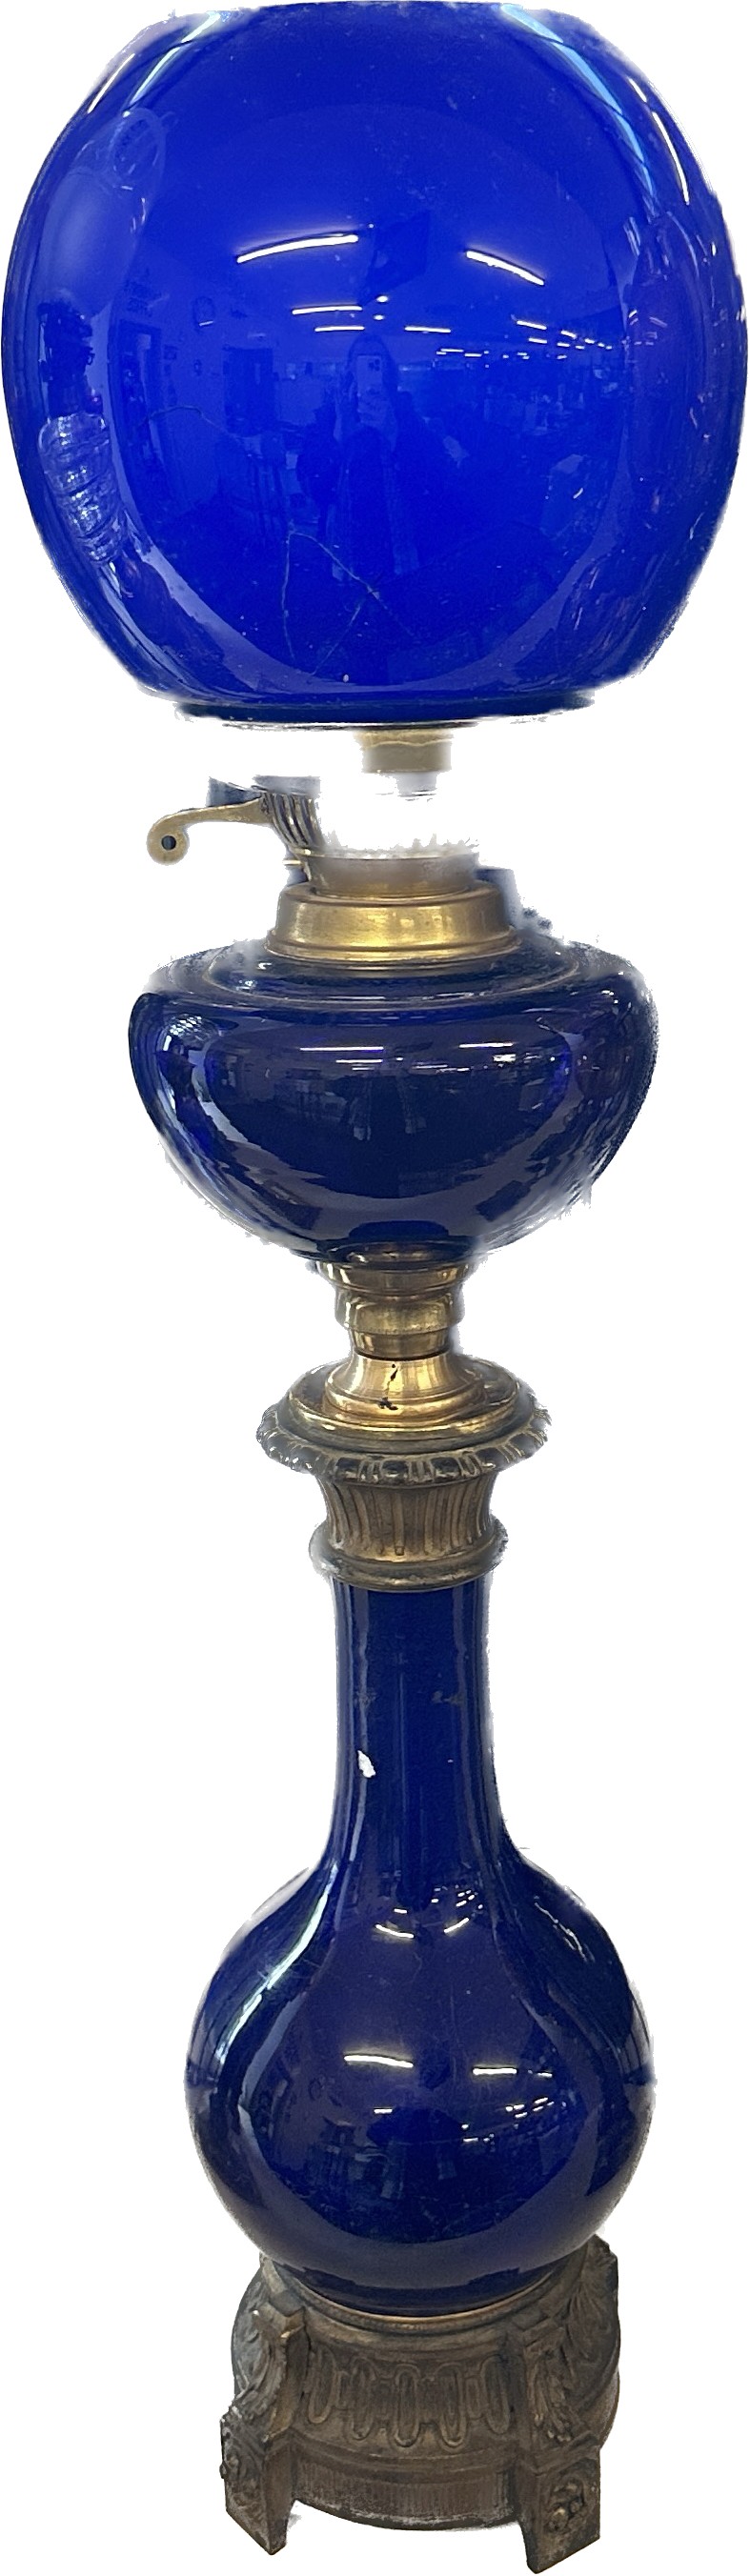 Antique blue glass brass based oil lamp complete with funnel and shade - Image 4 of 5